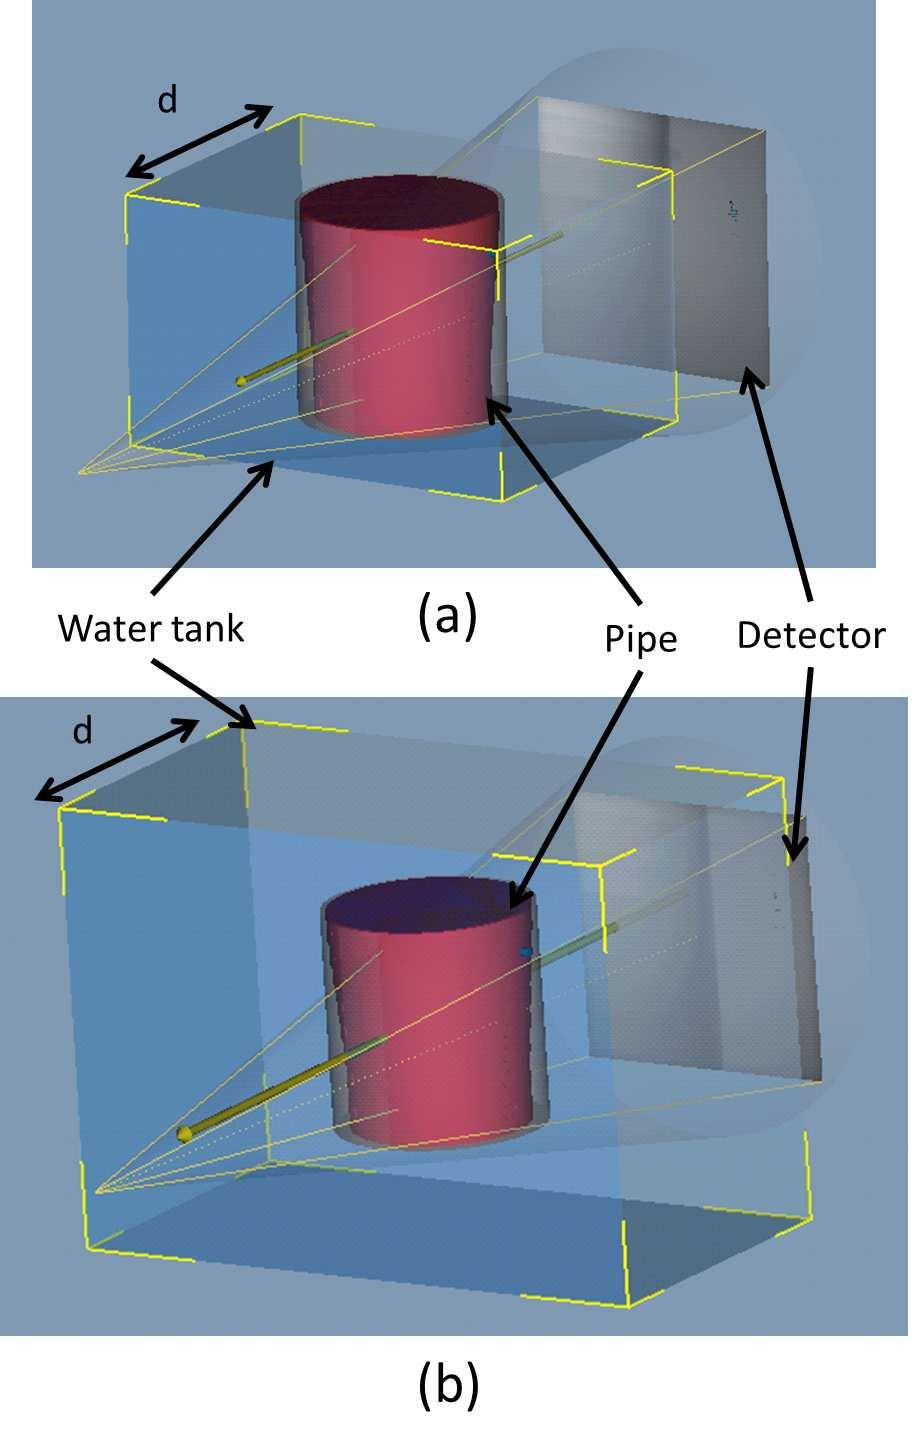 5. Investigation of Peripheral Scattering The simulated setup, while including all objects in the direct source-detector path, does not account for scattering from out-of-setup objects that would